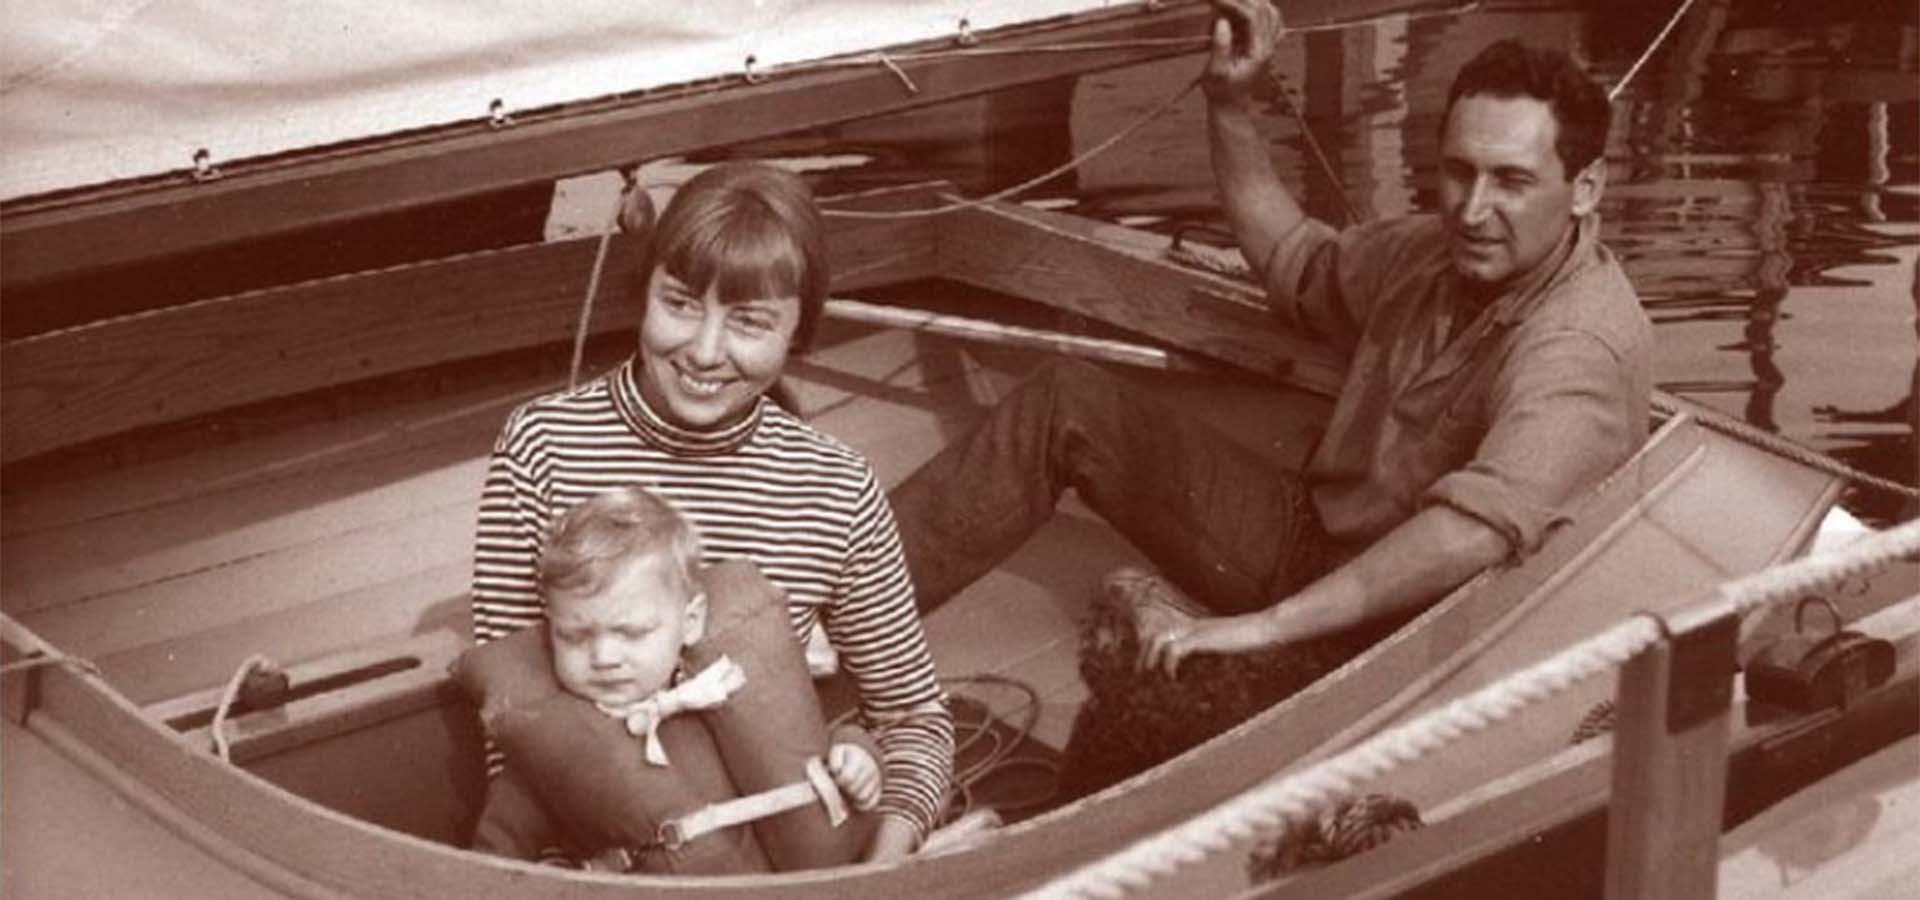 Old photo of a small family in a personal sailboat.